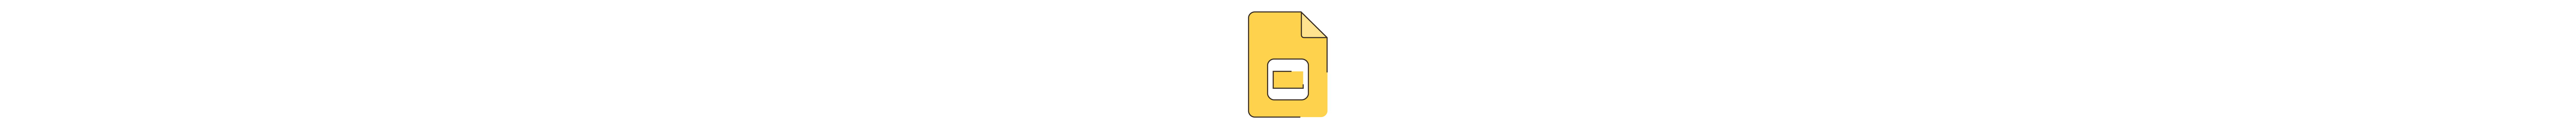 Google Slides: The ULTIMATE guide | BrightCarbon